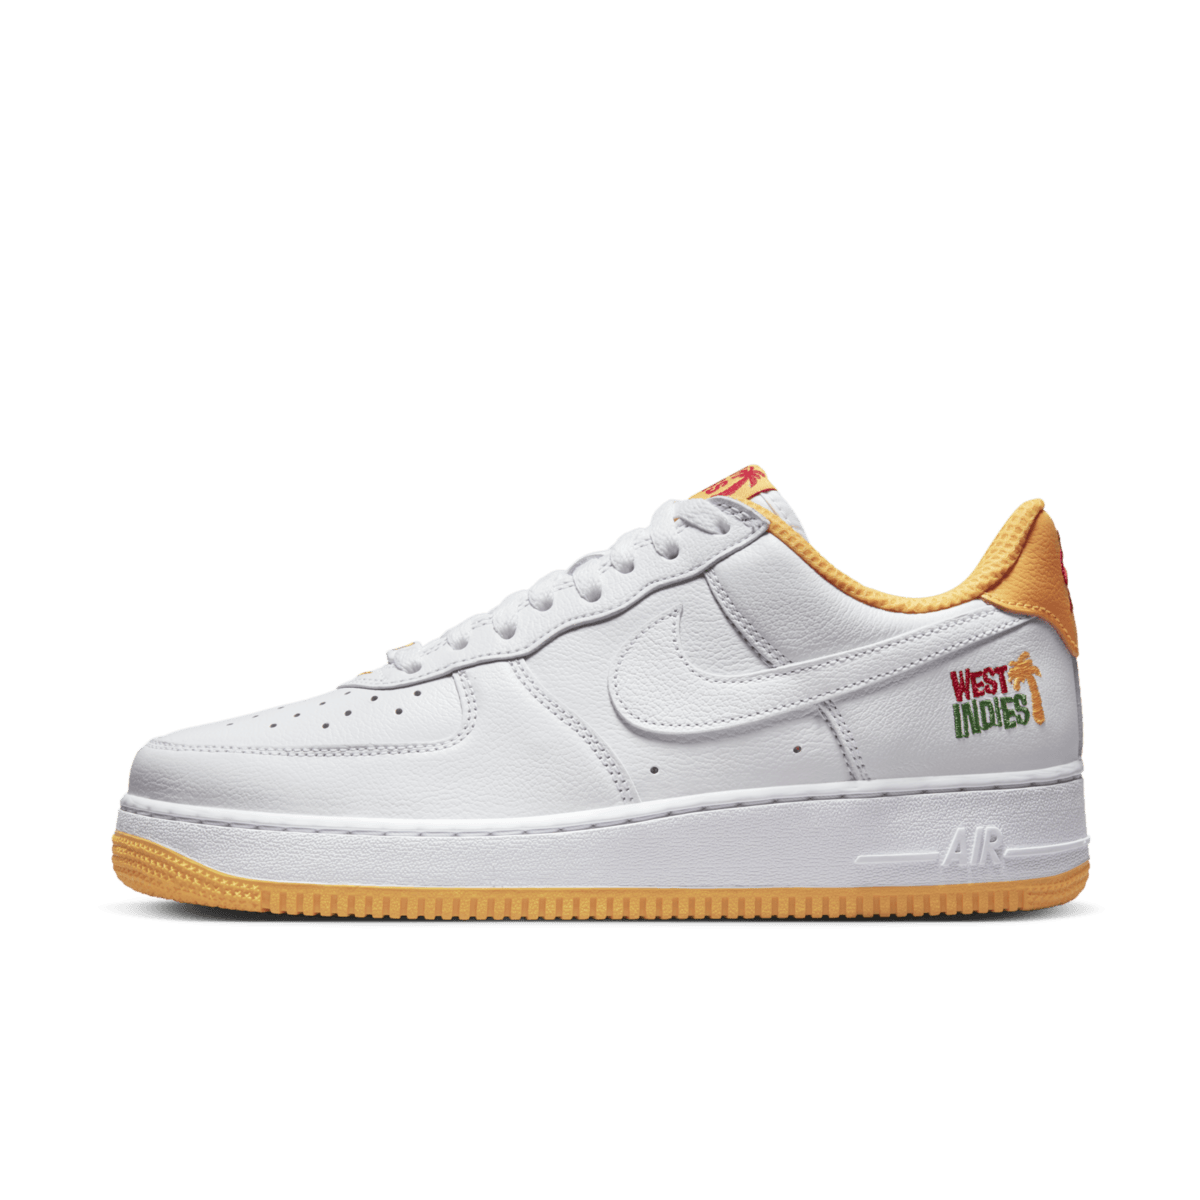 Nike Air Force 1 Low Retro 'West Indies Yellow' DX1156-101